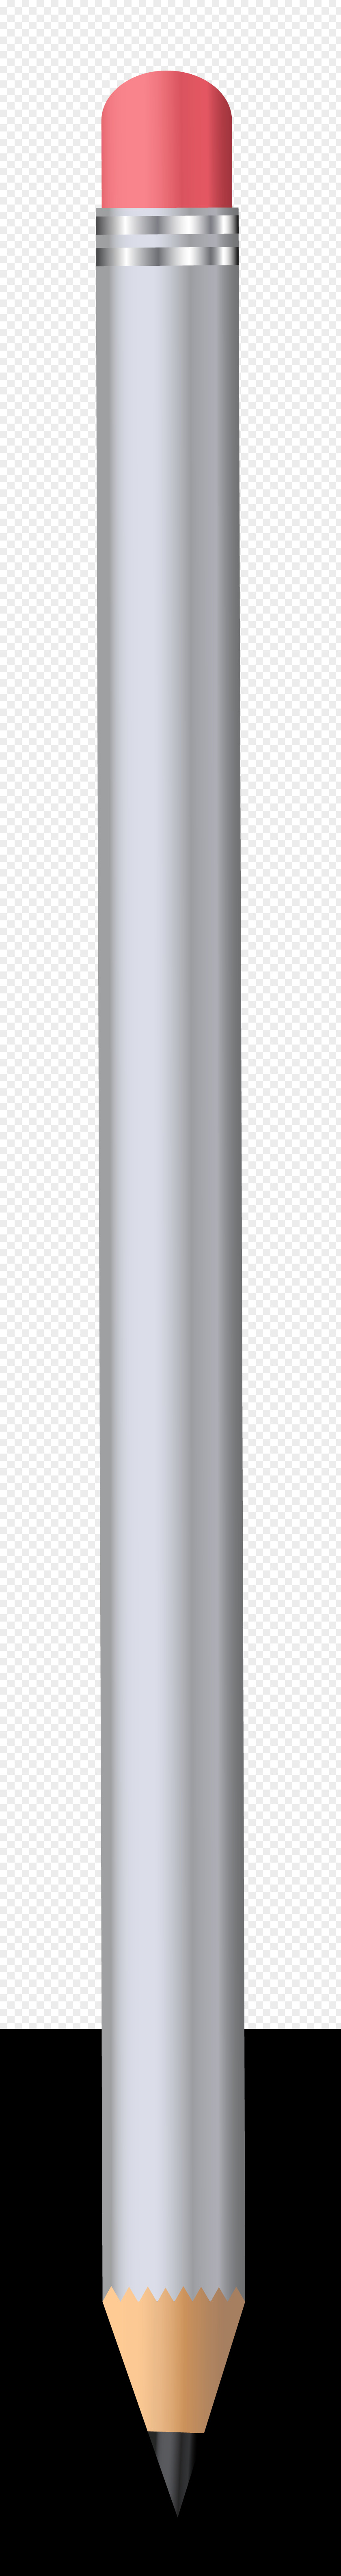 Silver Pencil Clipart Image Cylinder Design Product PNG